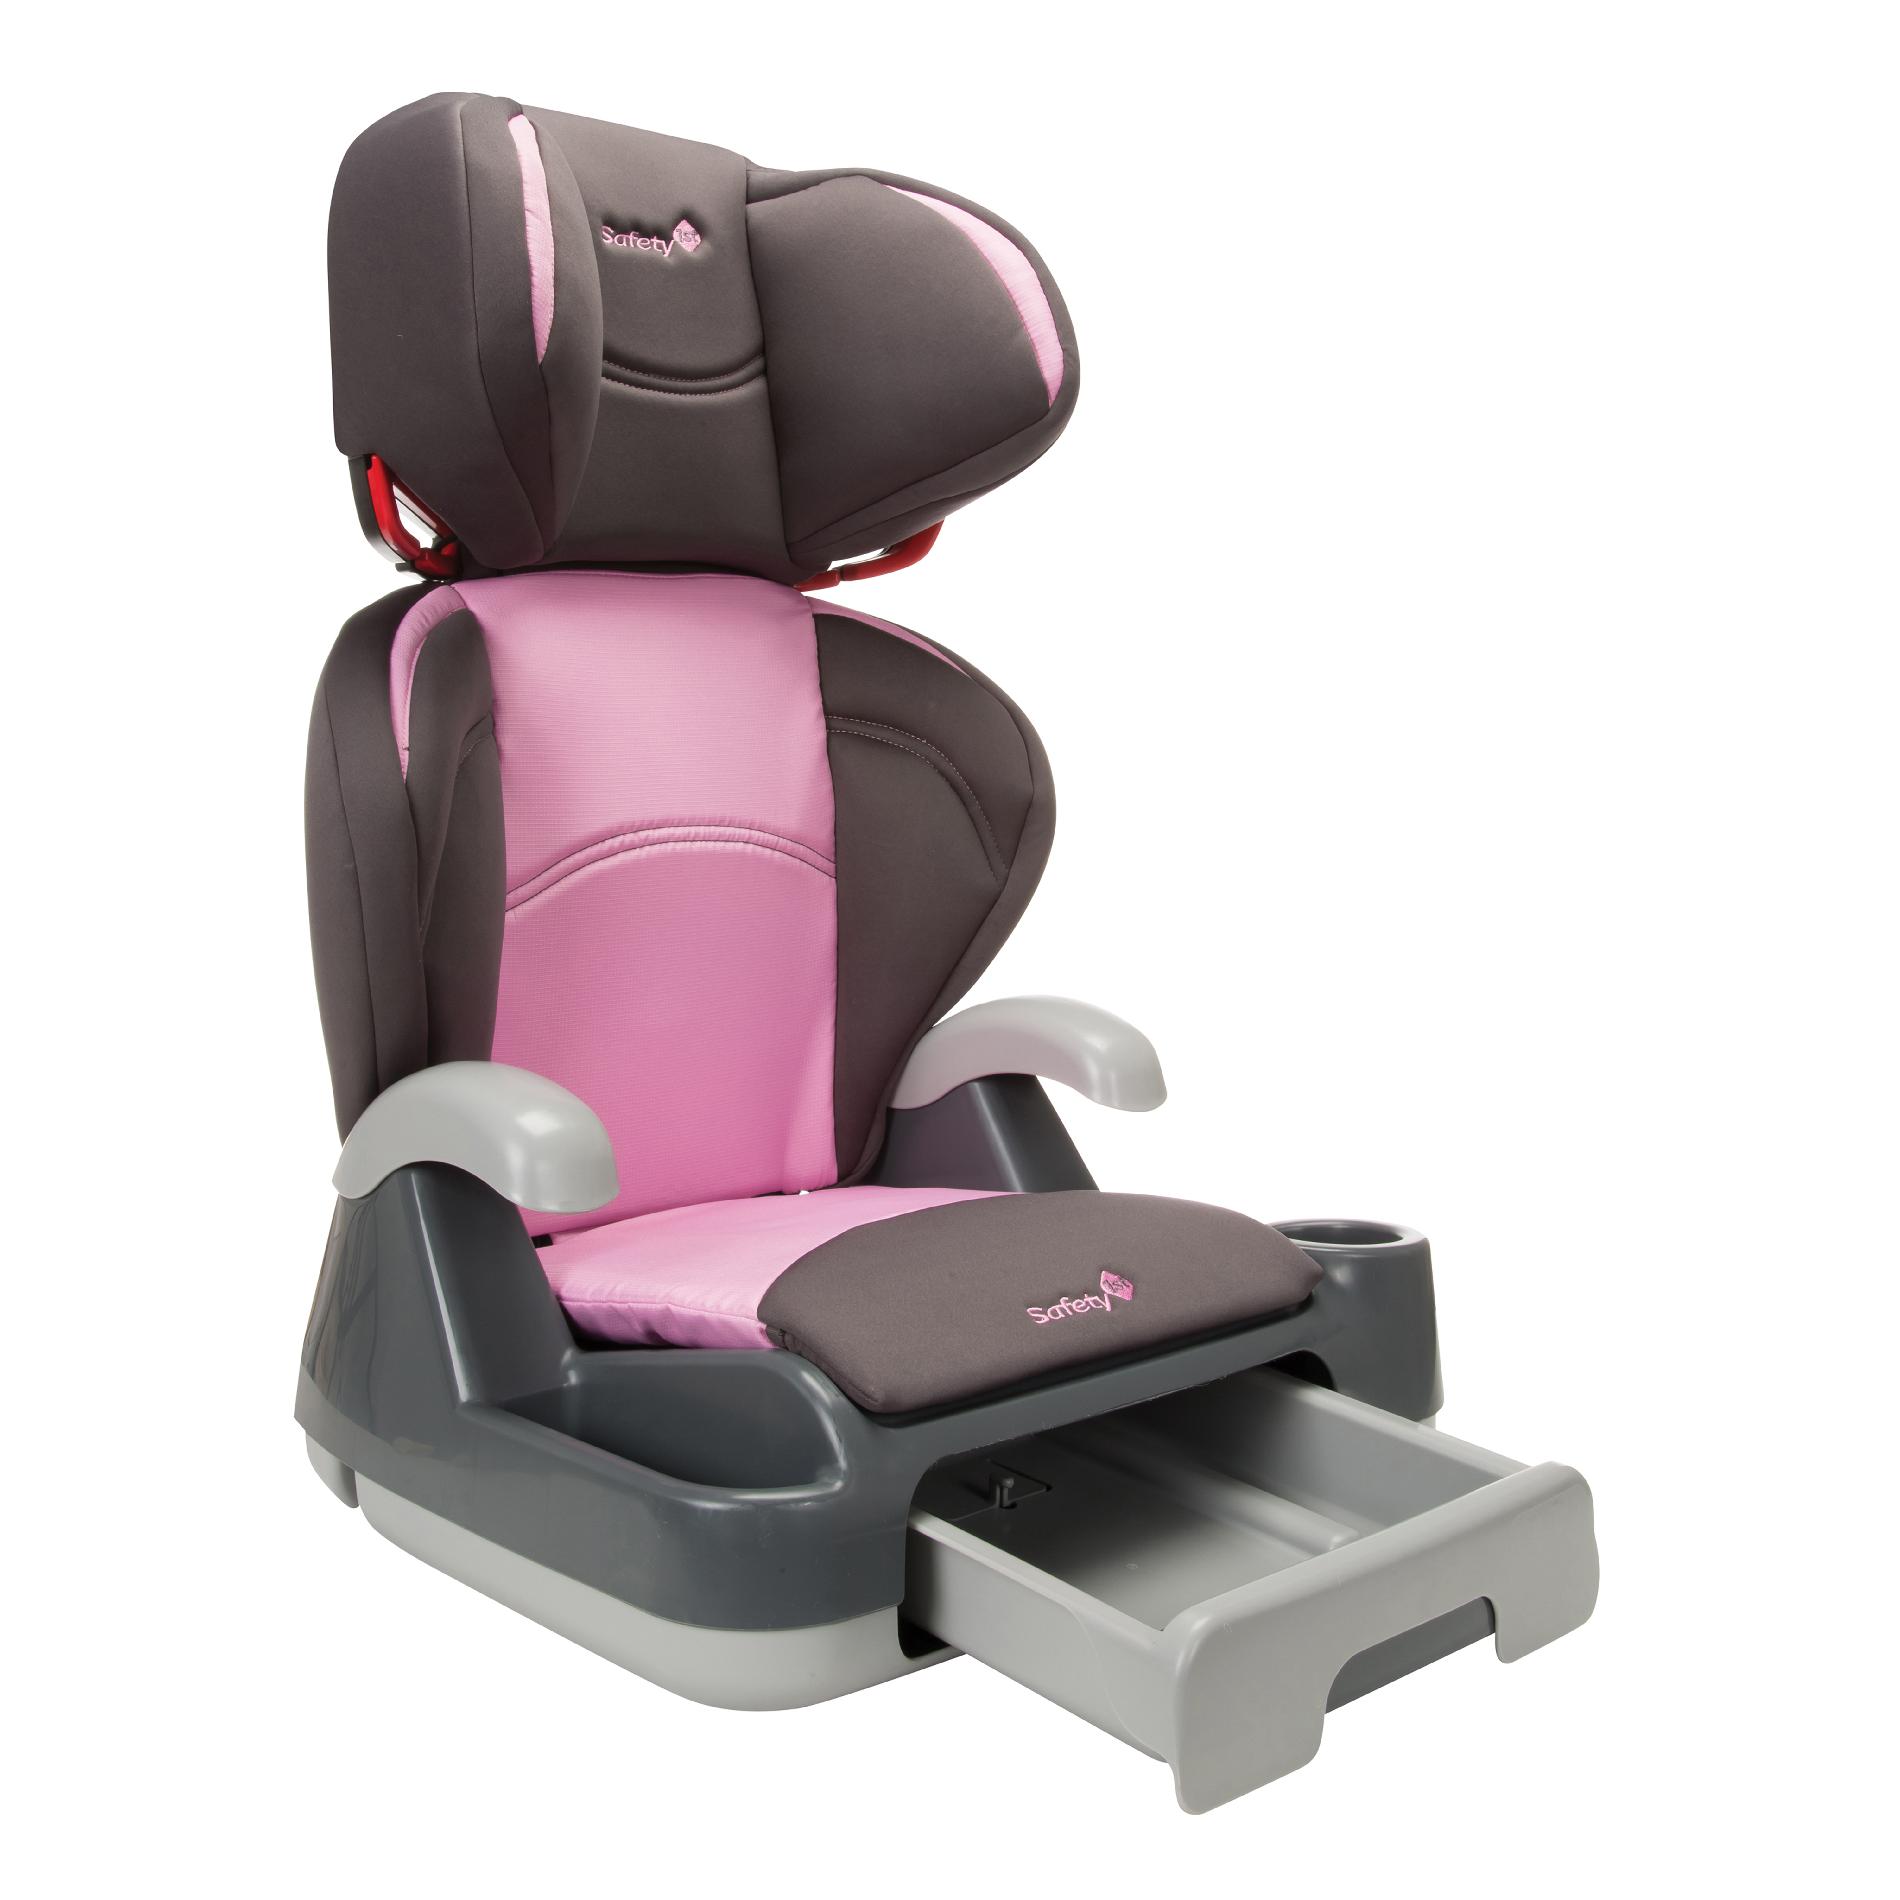 Safety 1st Store 'n Go Belt-Positioning Booster Car Seat - Nora